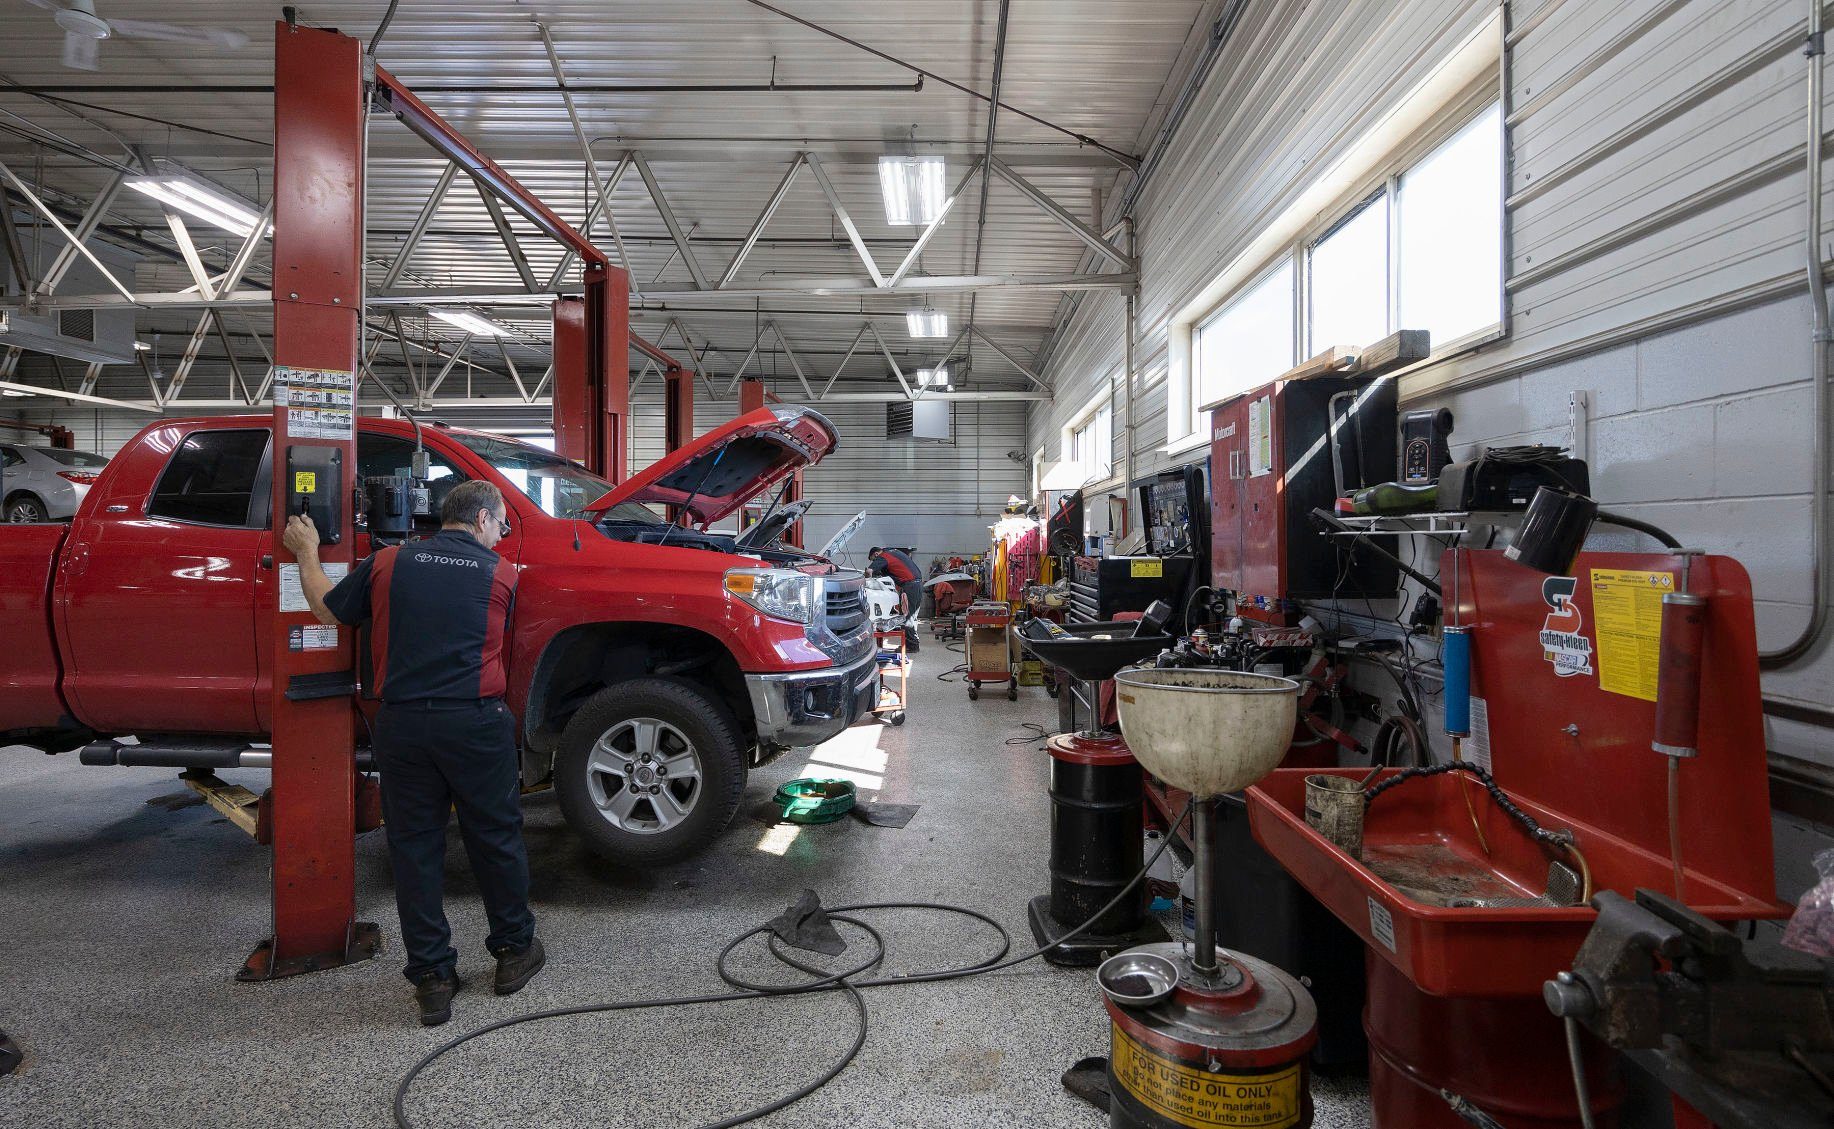 The service bay at Anderson-Weber Toyota in Dubuque.    PHOTO CREDIT: Stephen Gassman